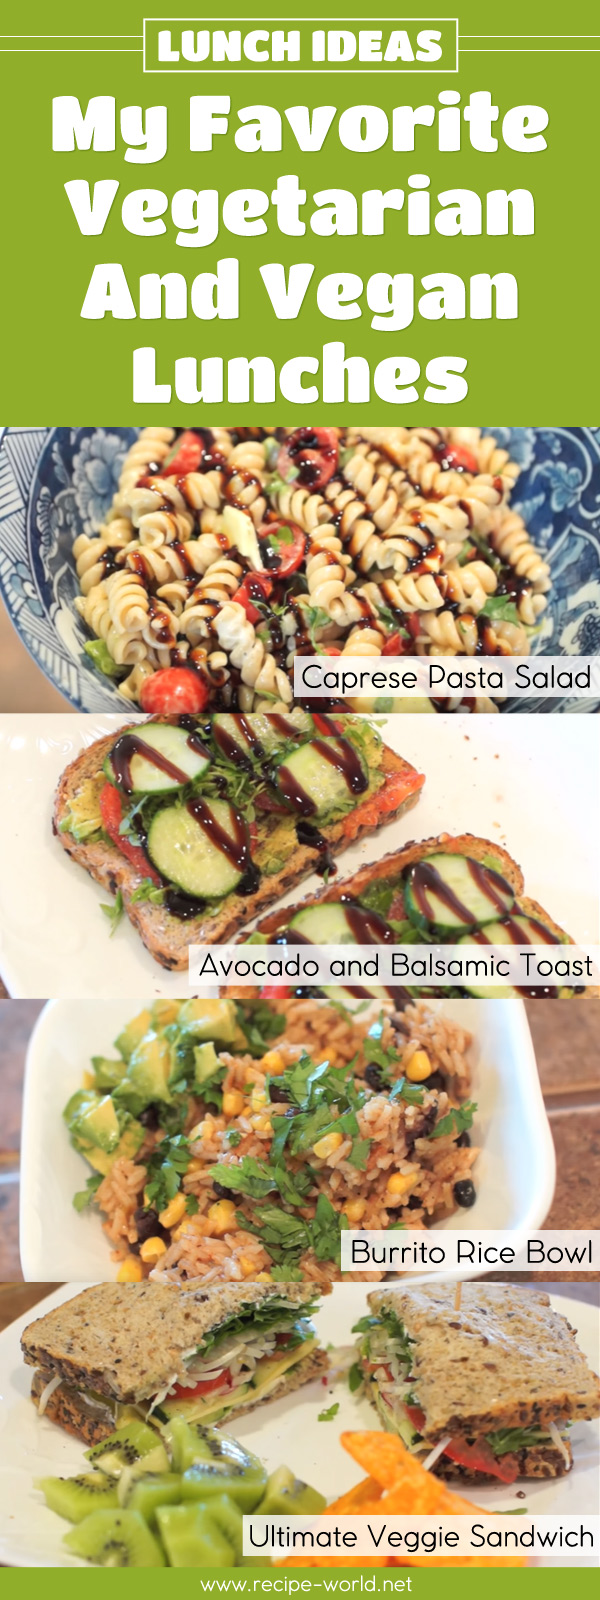 Lunch Ideas - My Favorite Vegetarian & Vegan Lunches